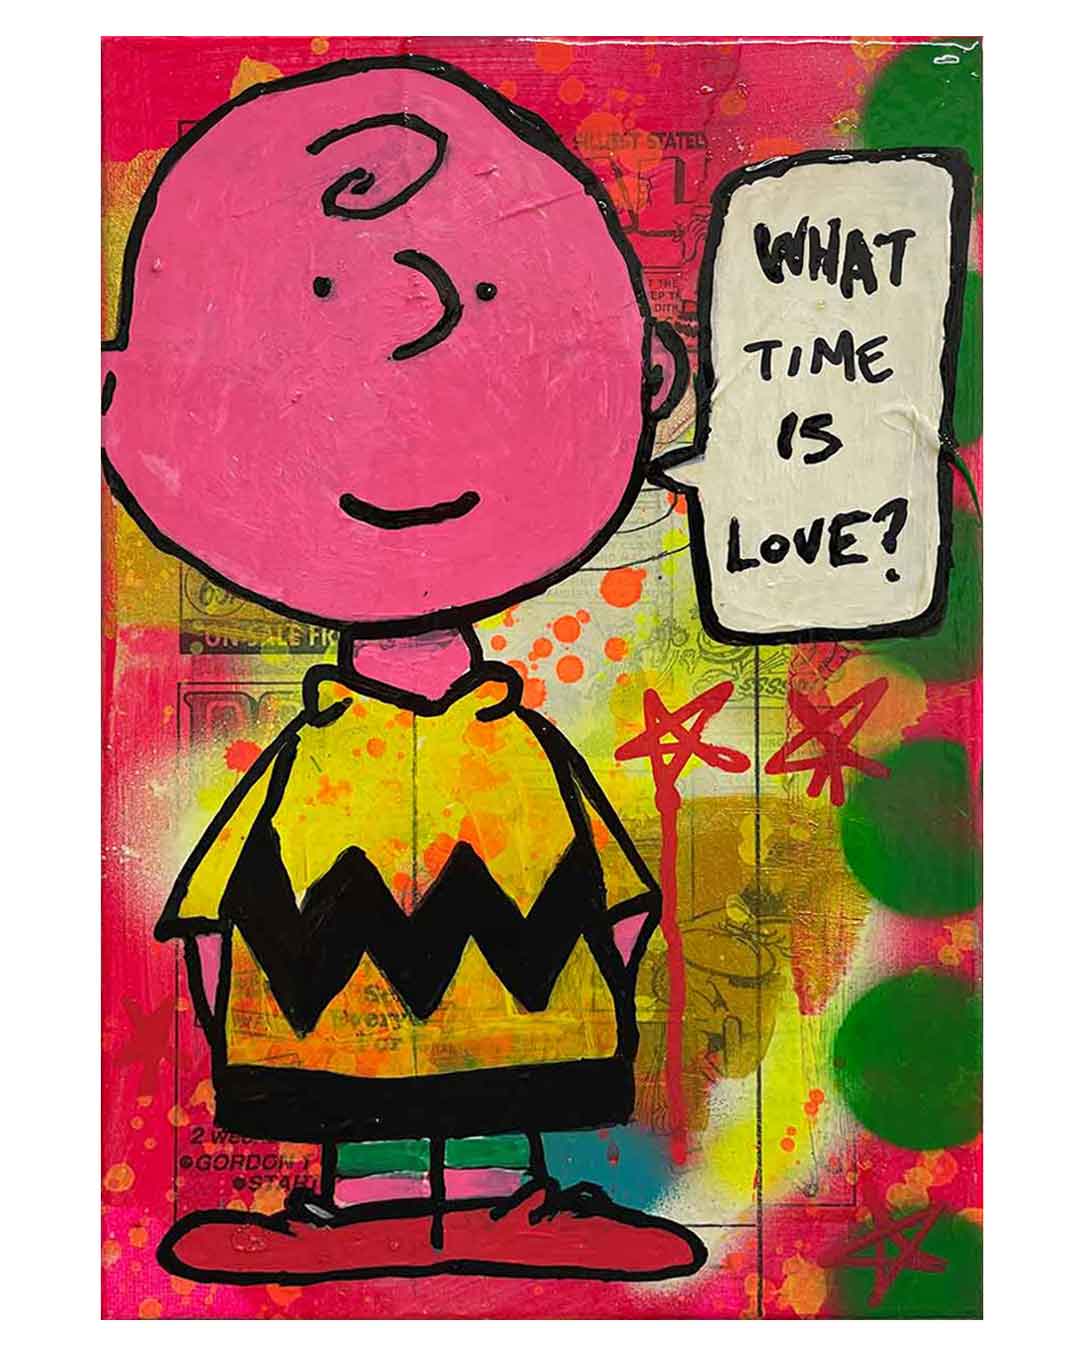 What time is Love? Painting by Barrie J Davies 2022, Mixed media on Canvas, 21cm x 29cm, Unframed and ready to hang.